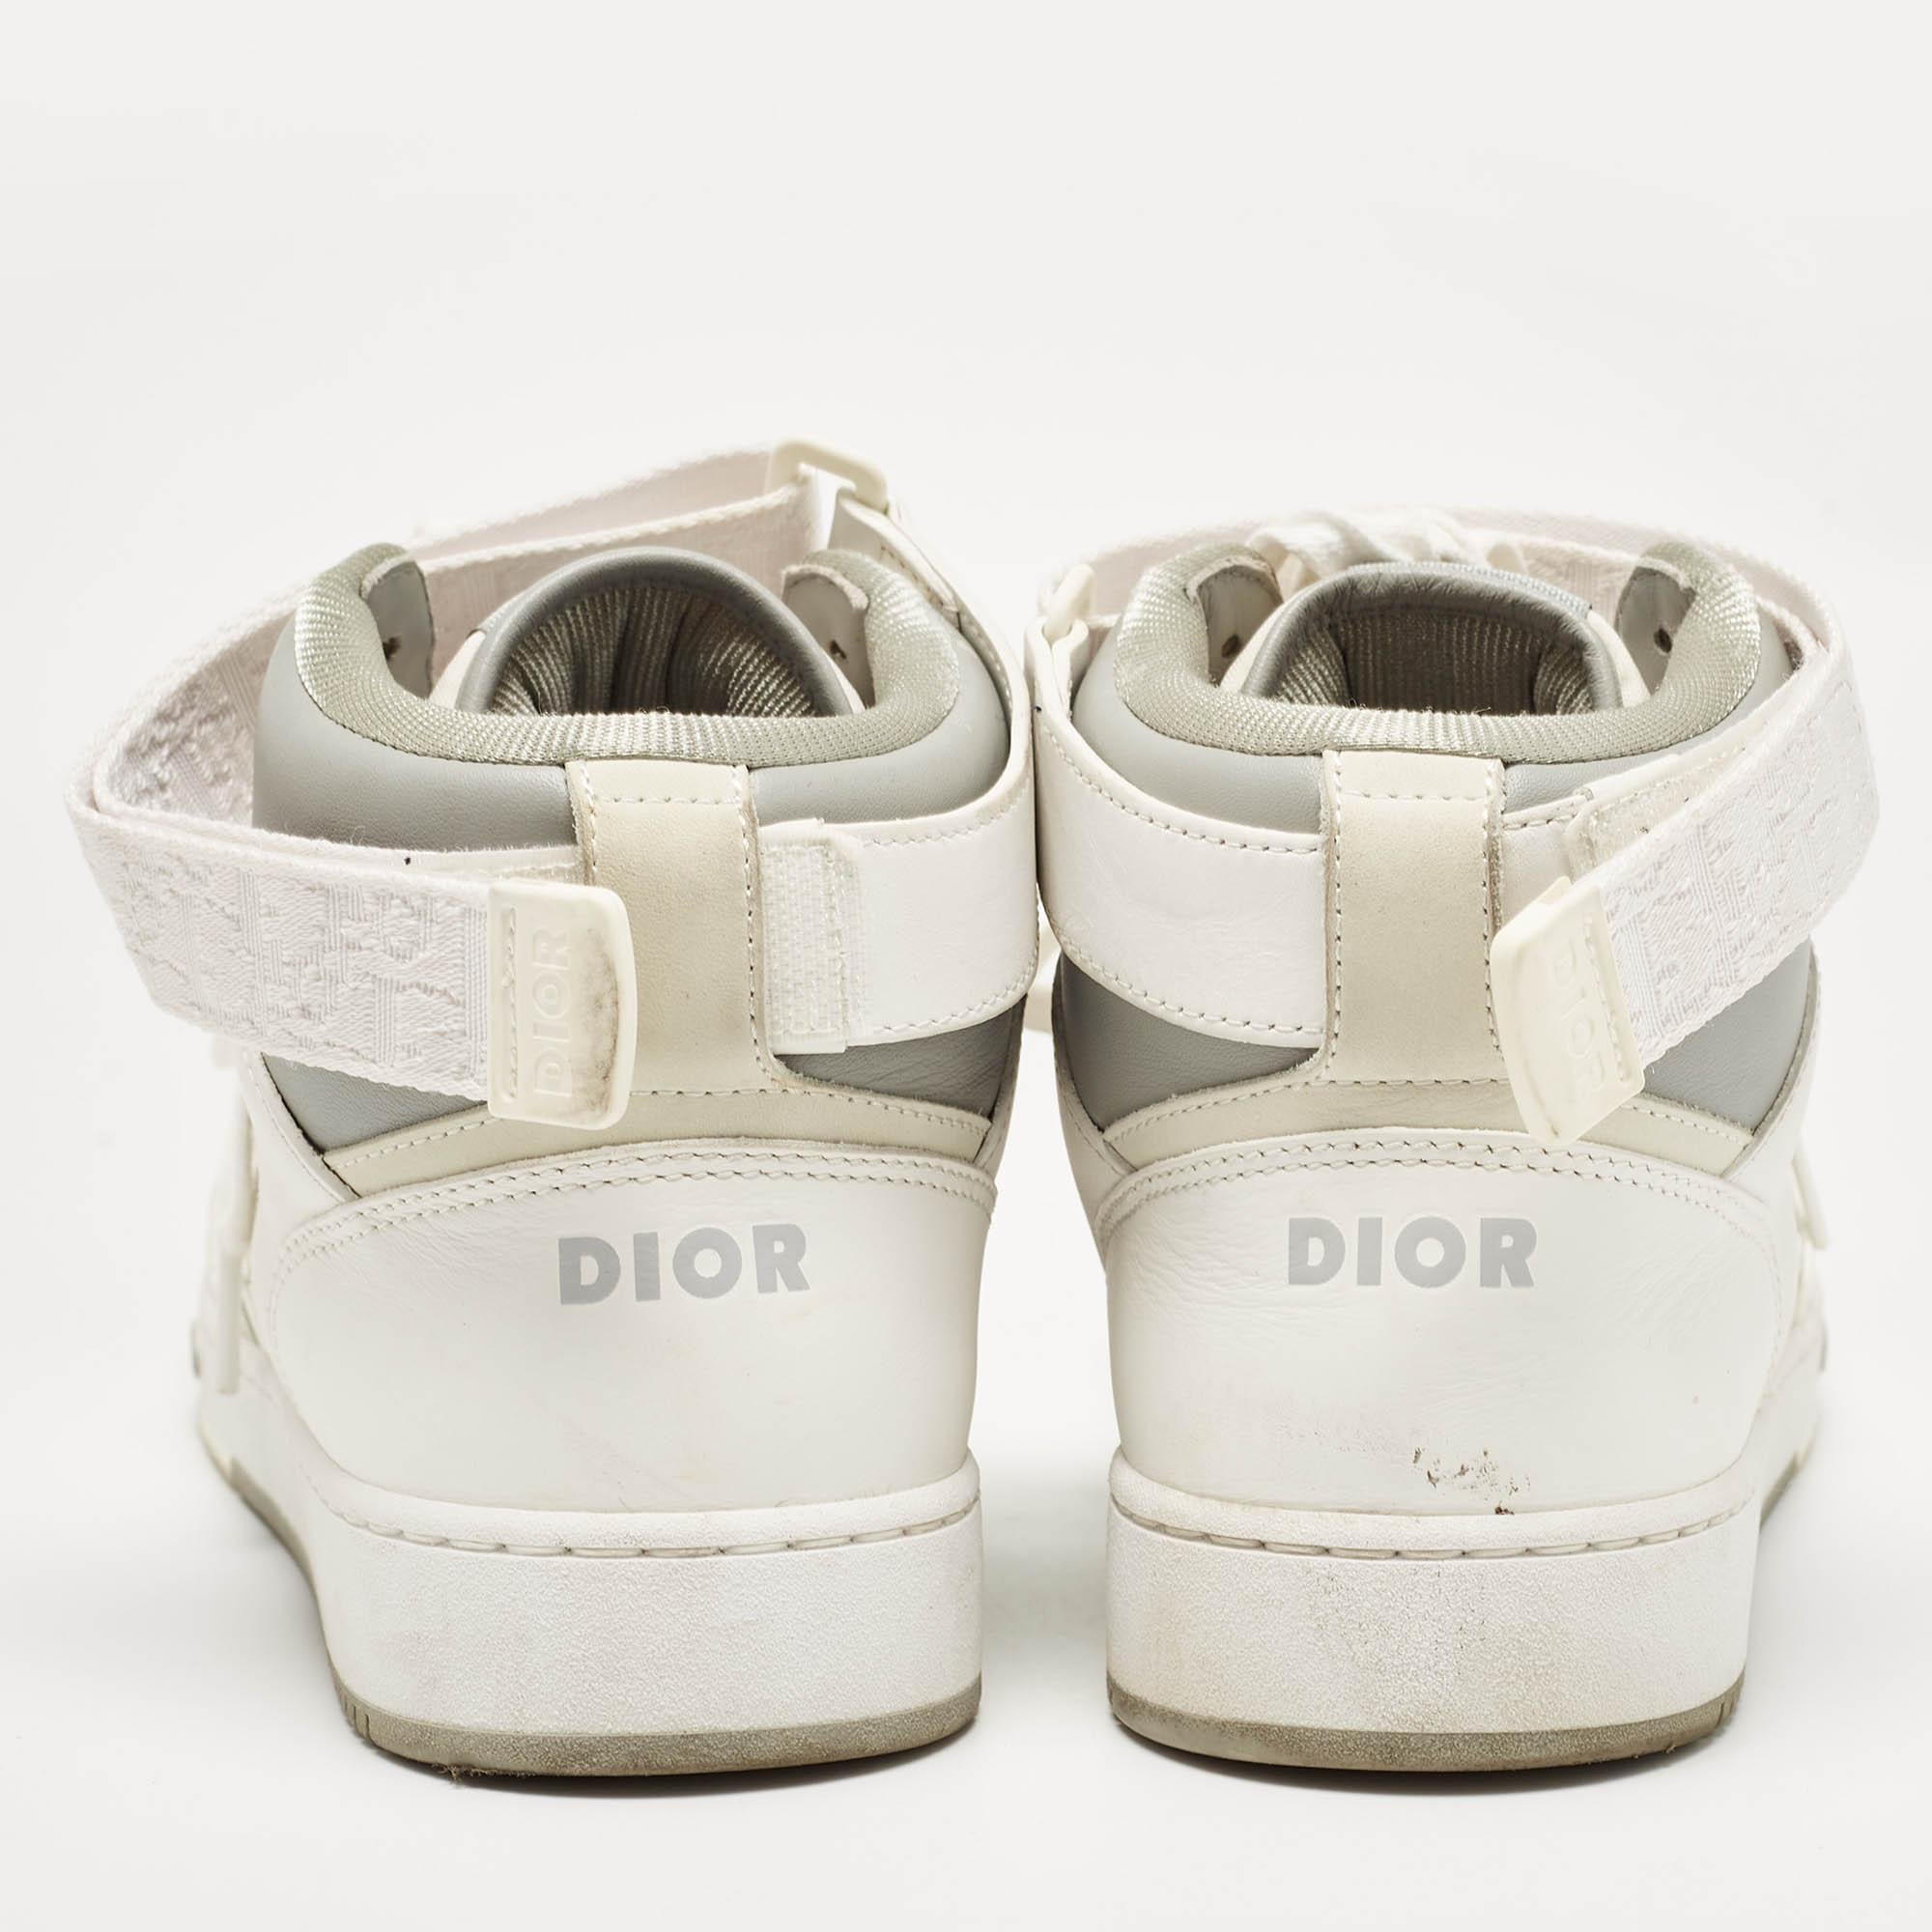 Men's Dior White/Grey Leather B27 High Top Sneakers Size 42 For Sale